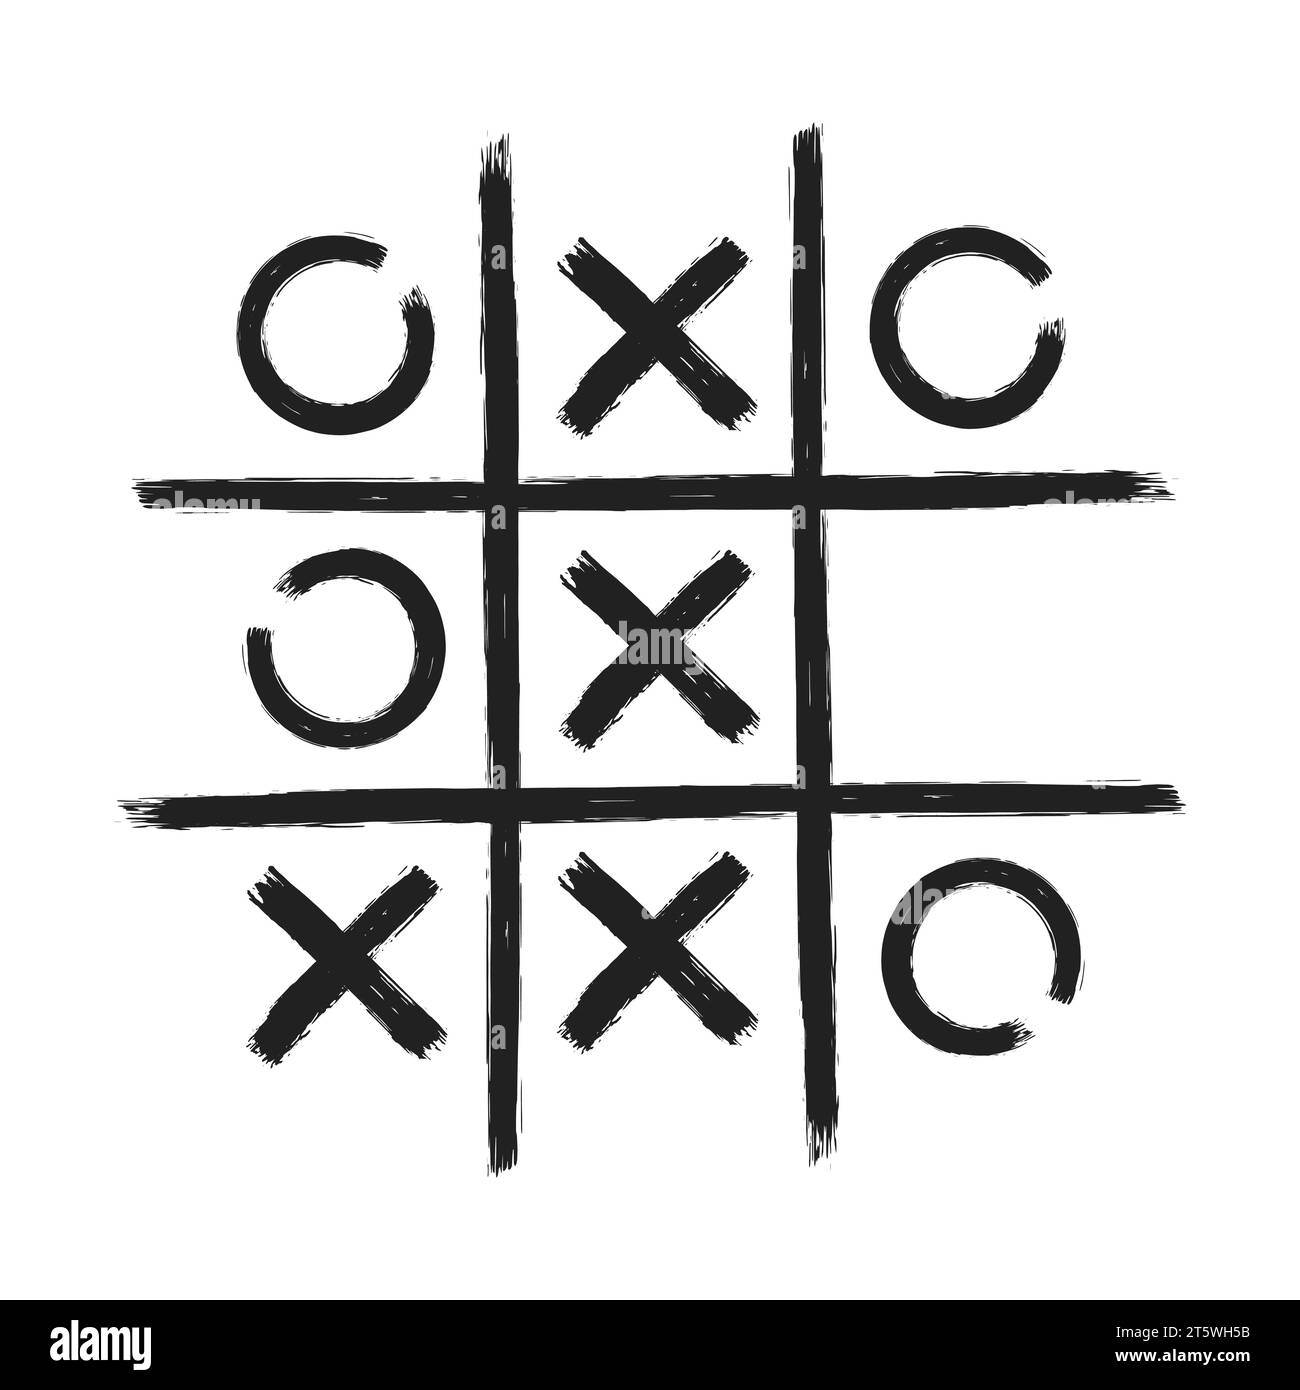 Tic tac toe with hearts on white background Vector Image